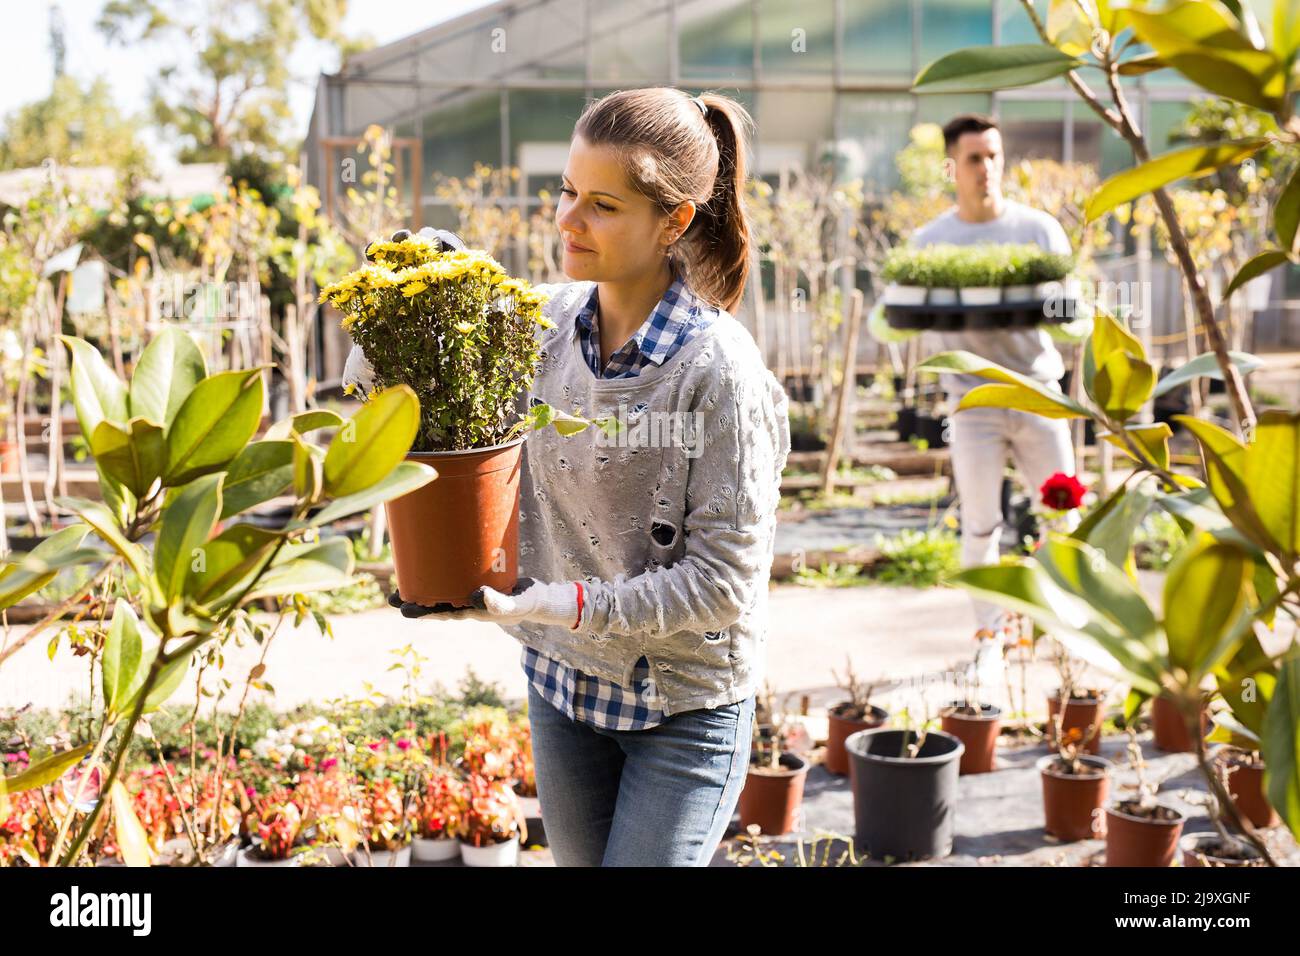 Florist girl working in greenhouse Stock Photo